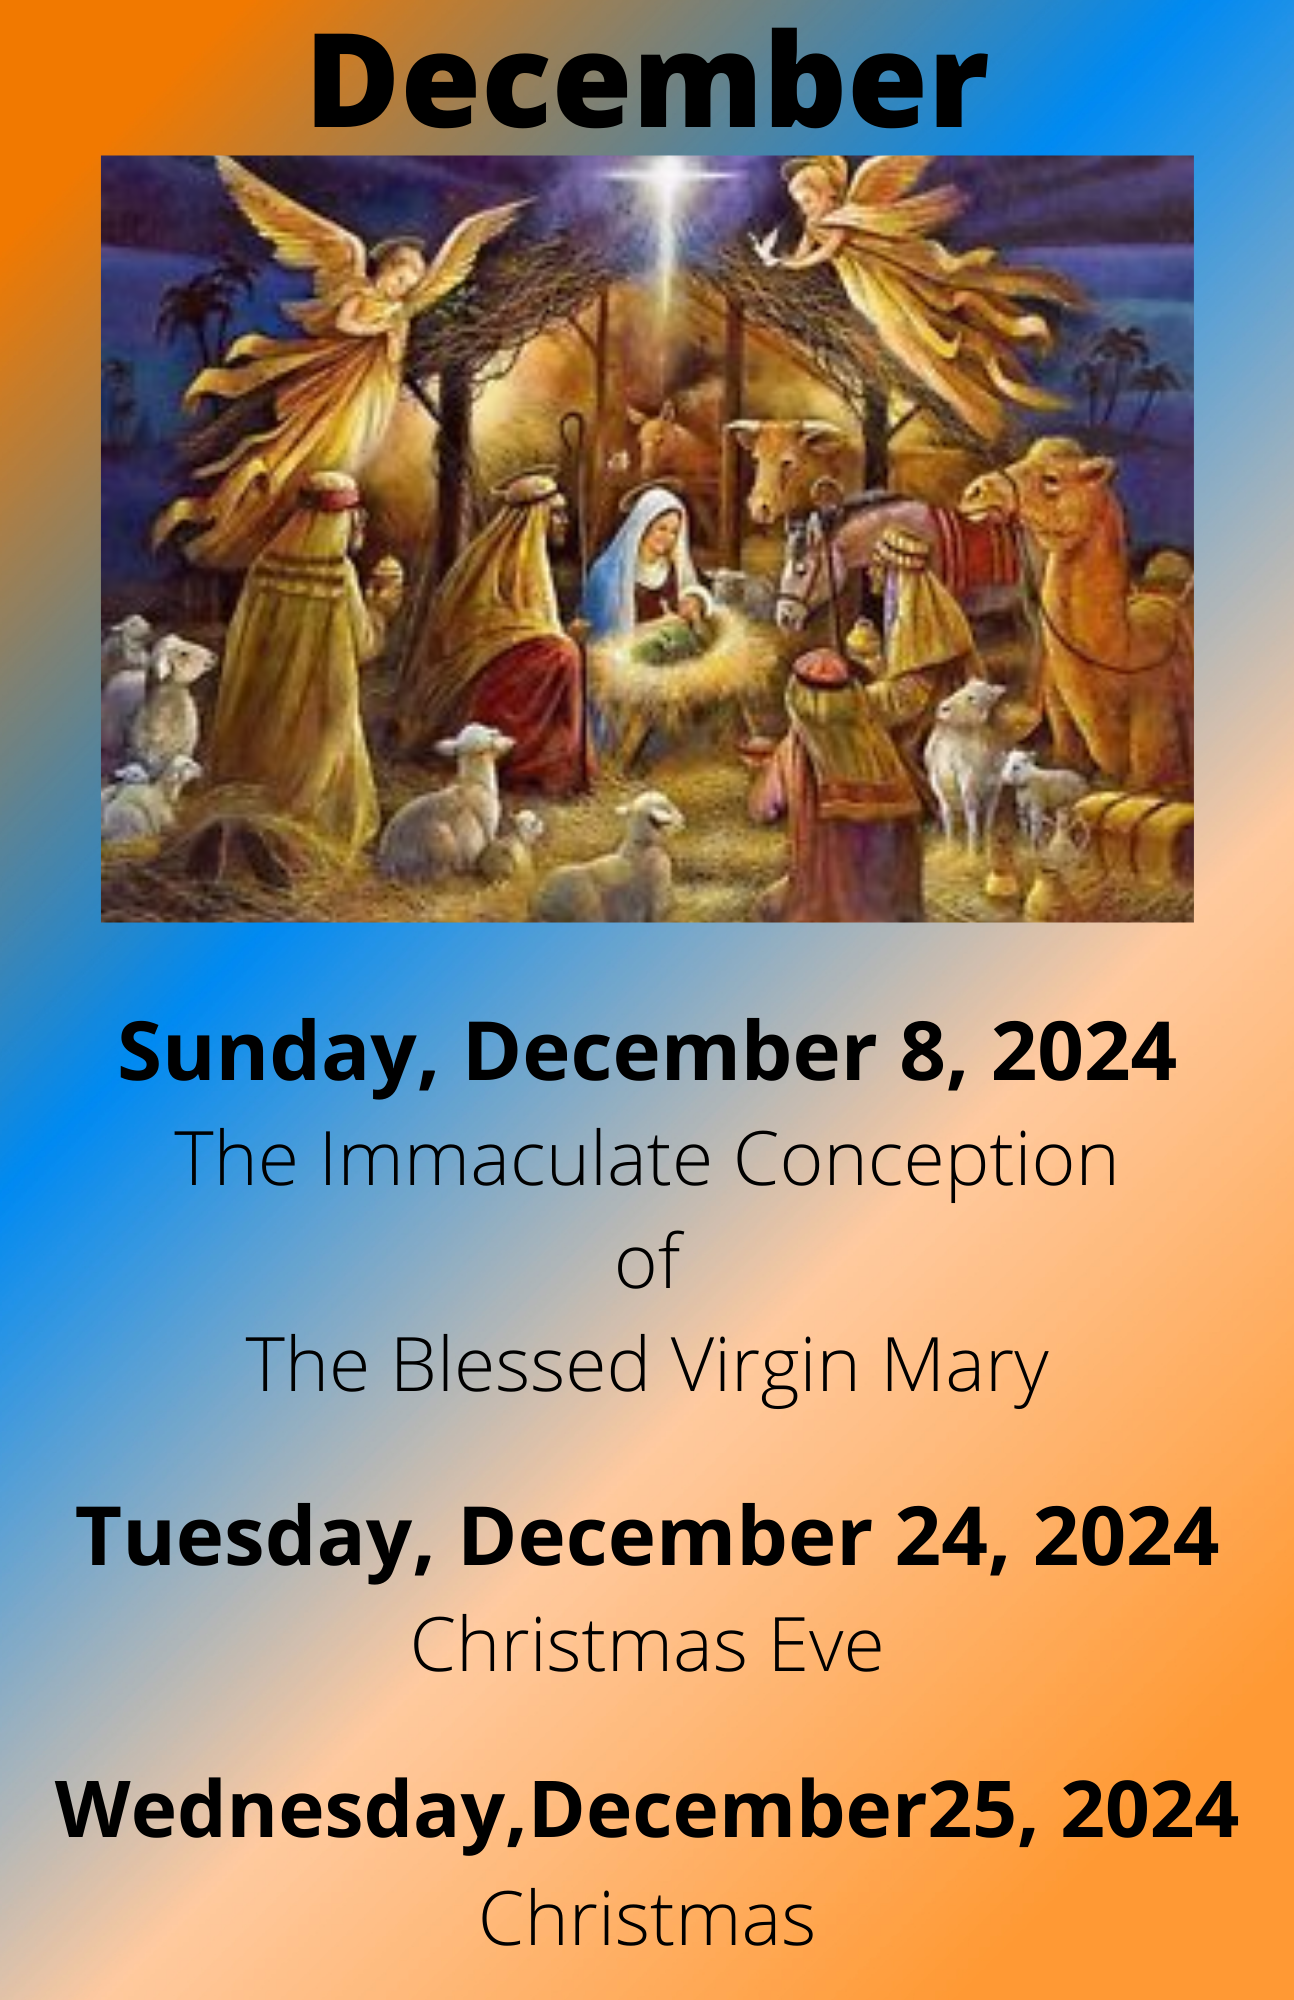 Sunday, December 8, 2024 The Immaculate Conception of The Blessed Virgin Mary Sunday, December 24, 2023 Christmas Eve Monday,December25, 2023 Christmas (1)